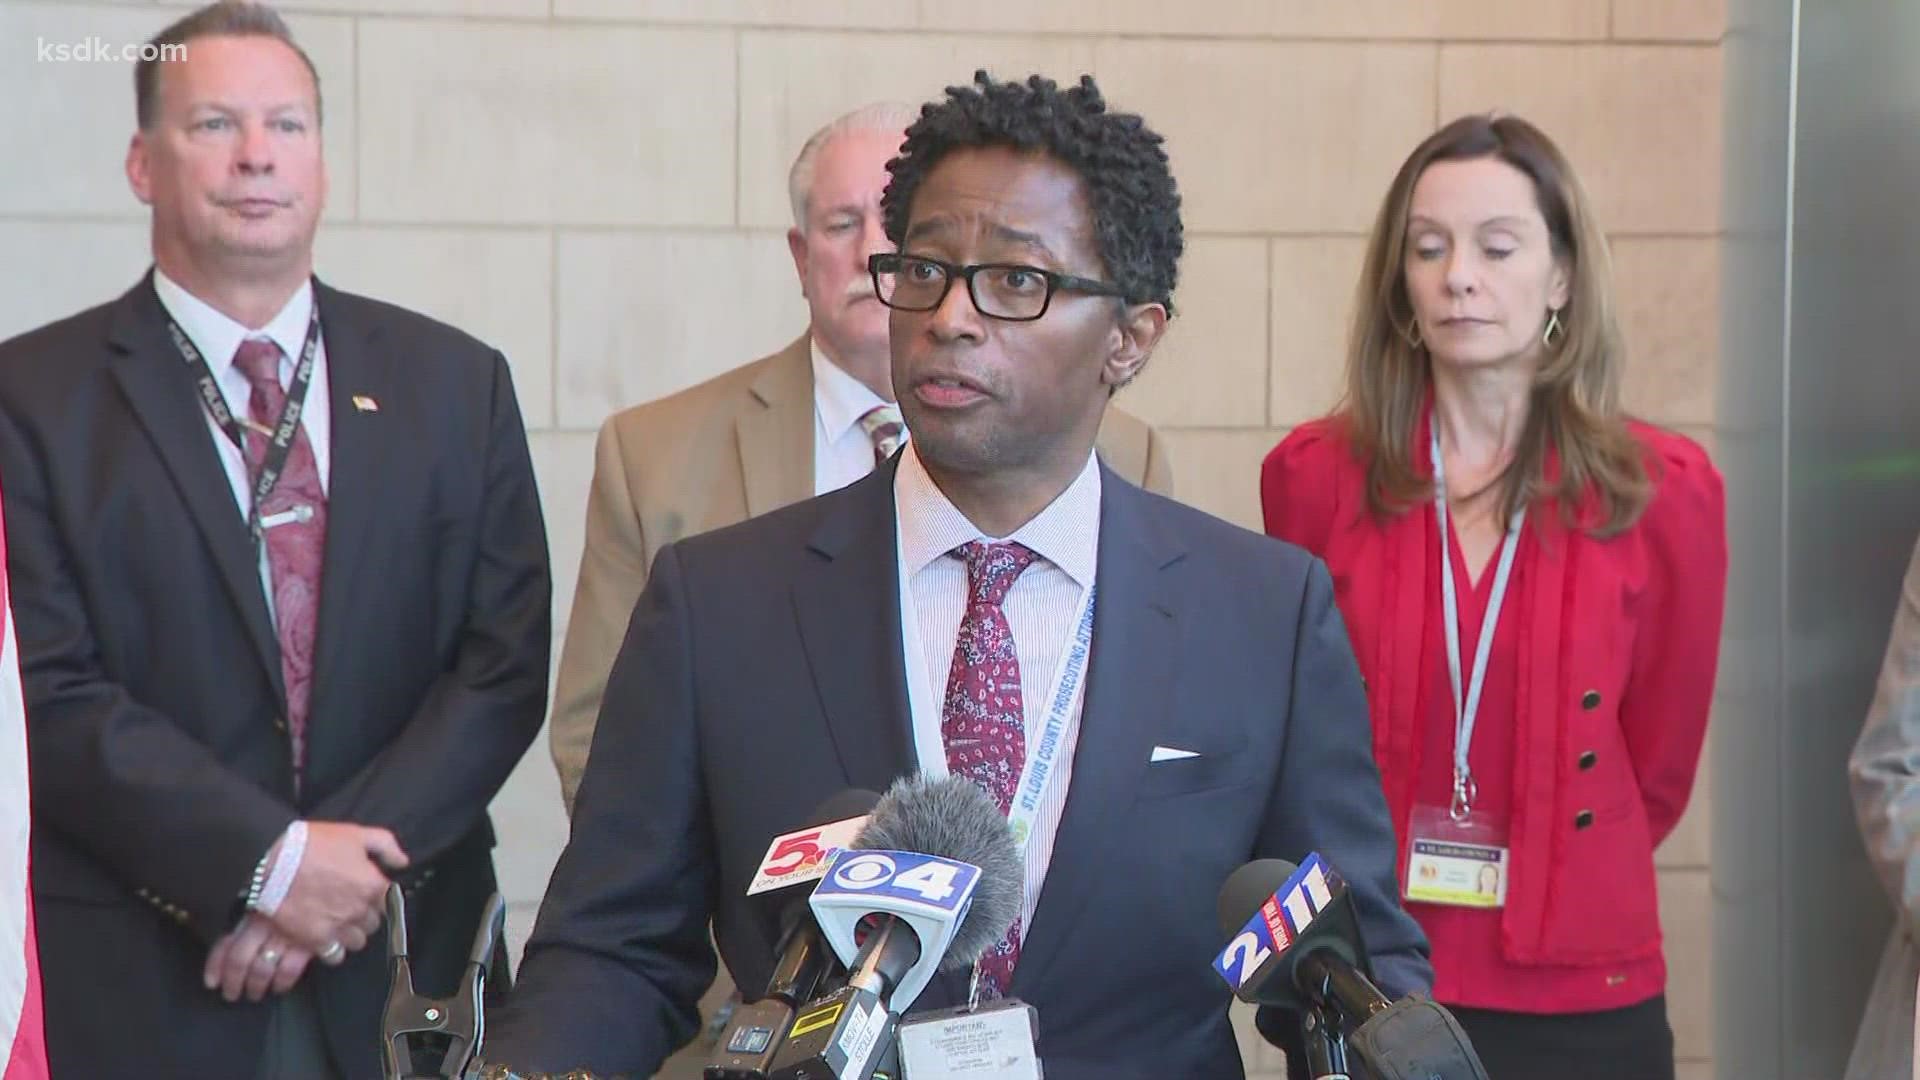 St. Louis County Prosecutor Wesley Bell gave an update after Thomas Bruce pleaded guilty and was sentence to life in prison for the 2018 attack.